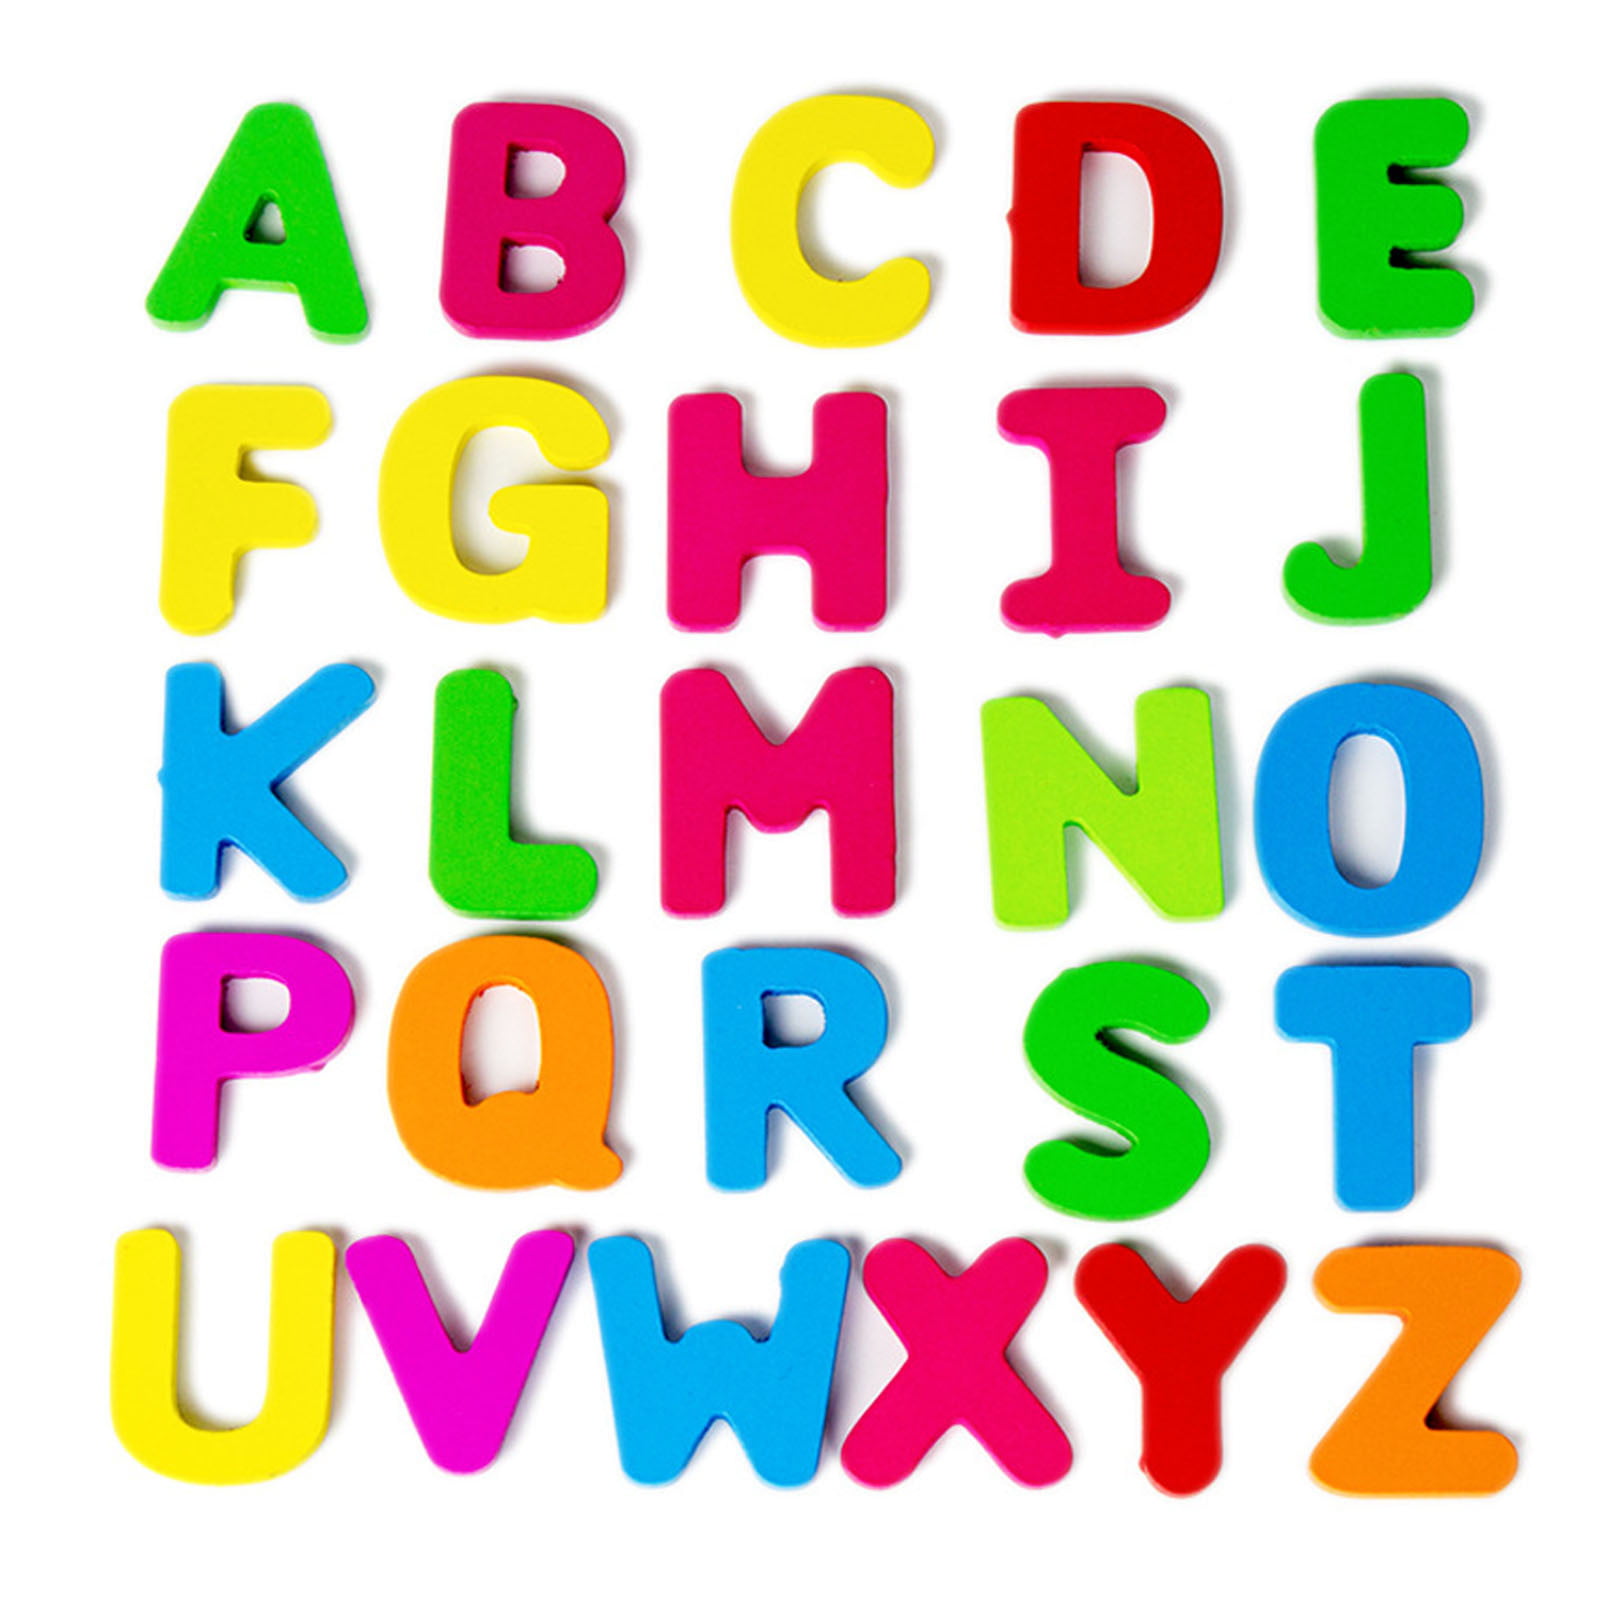 Details about   100Pcs Wooden Alphabet English Letter for Kids Educational Teaching Toy